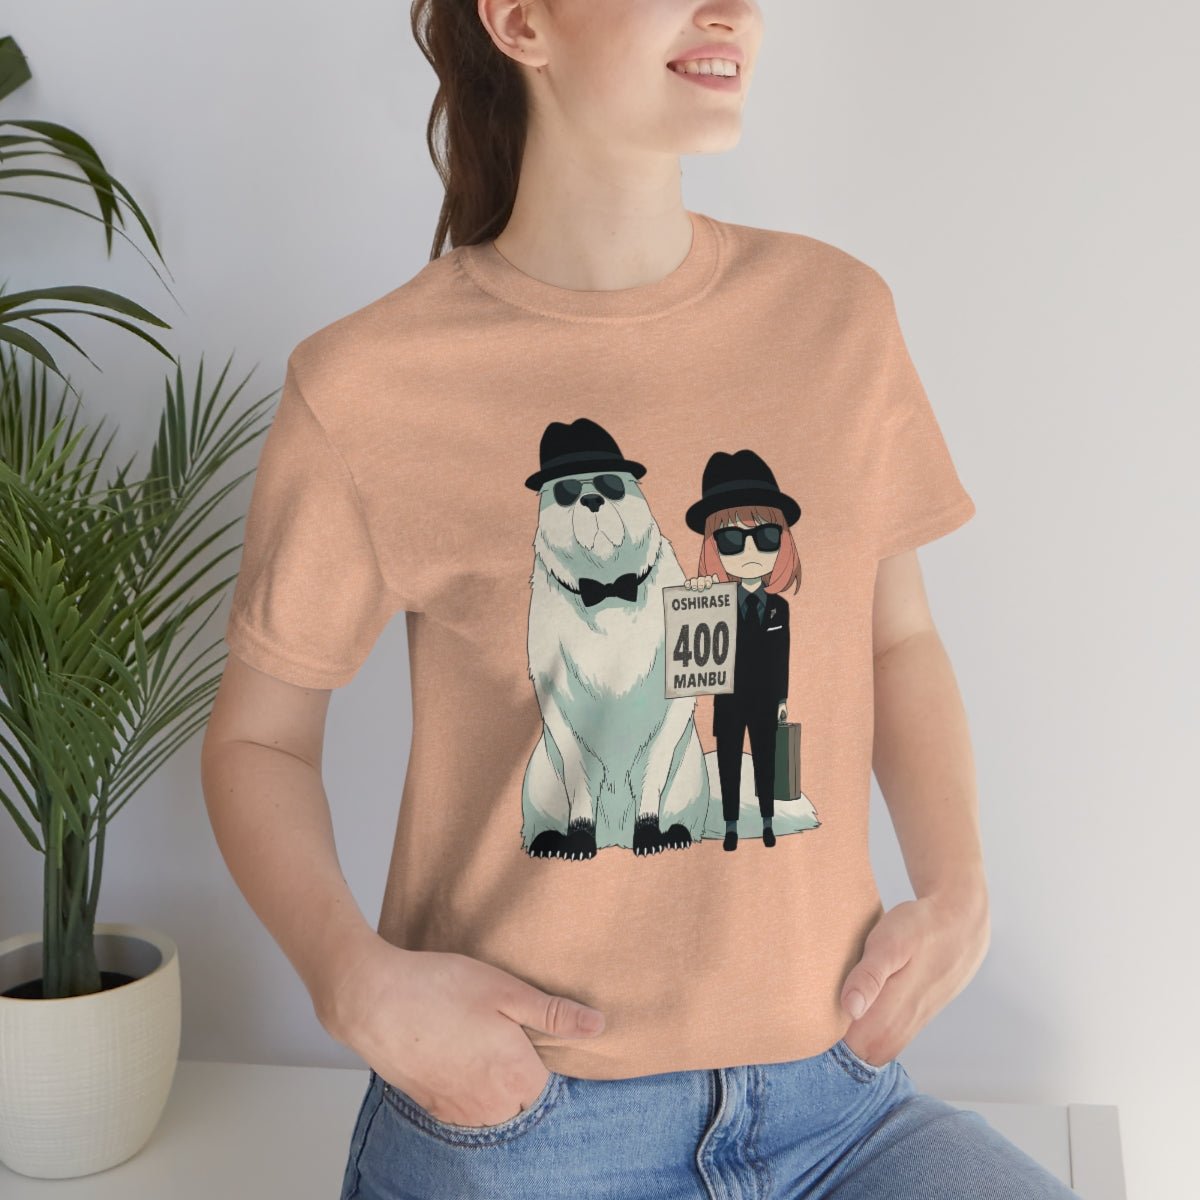 Anya Forger Spy x Family Anime Shirt - One Punch Fits